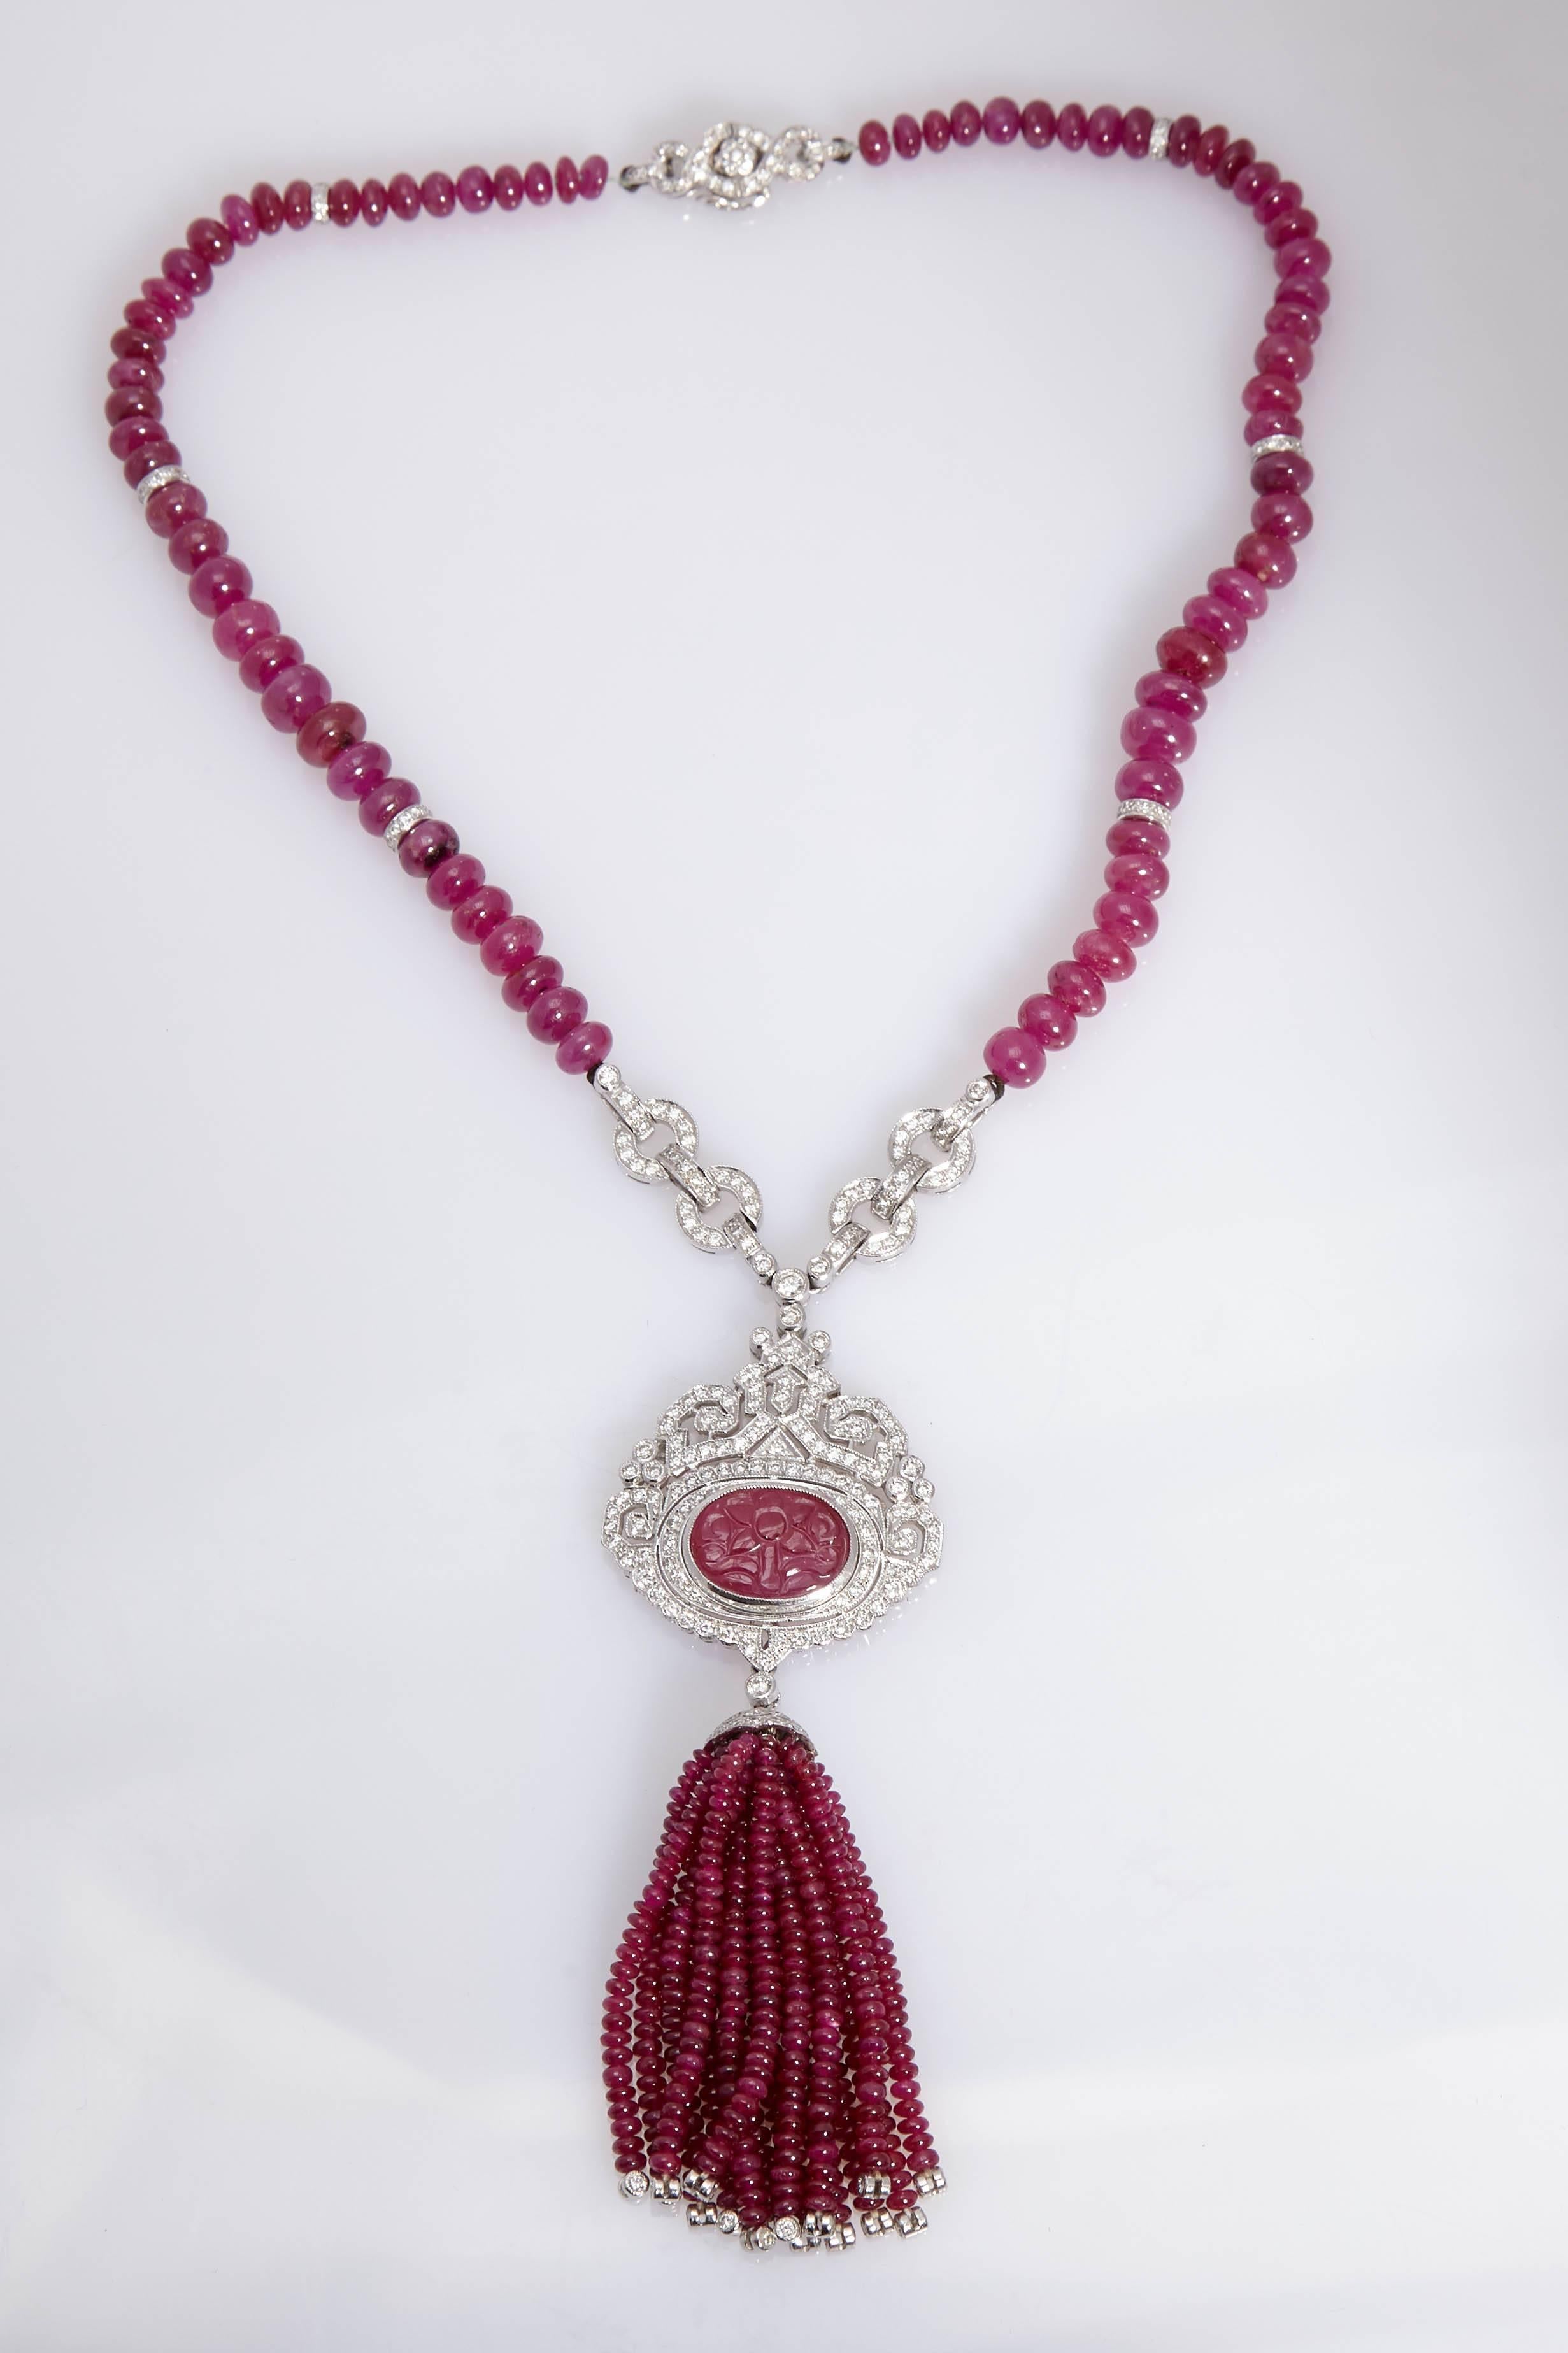 A beautiful sautoir drop necklace with natural (no heat) ruby beads, suspending a diamonds and carved ruby centre-piece of oriental design, with dangling smaller ruby beads tassel. Mounted on 18kt white gold, circa 1990s.